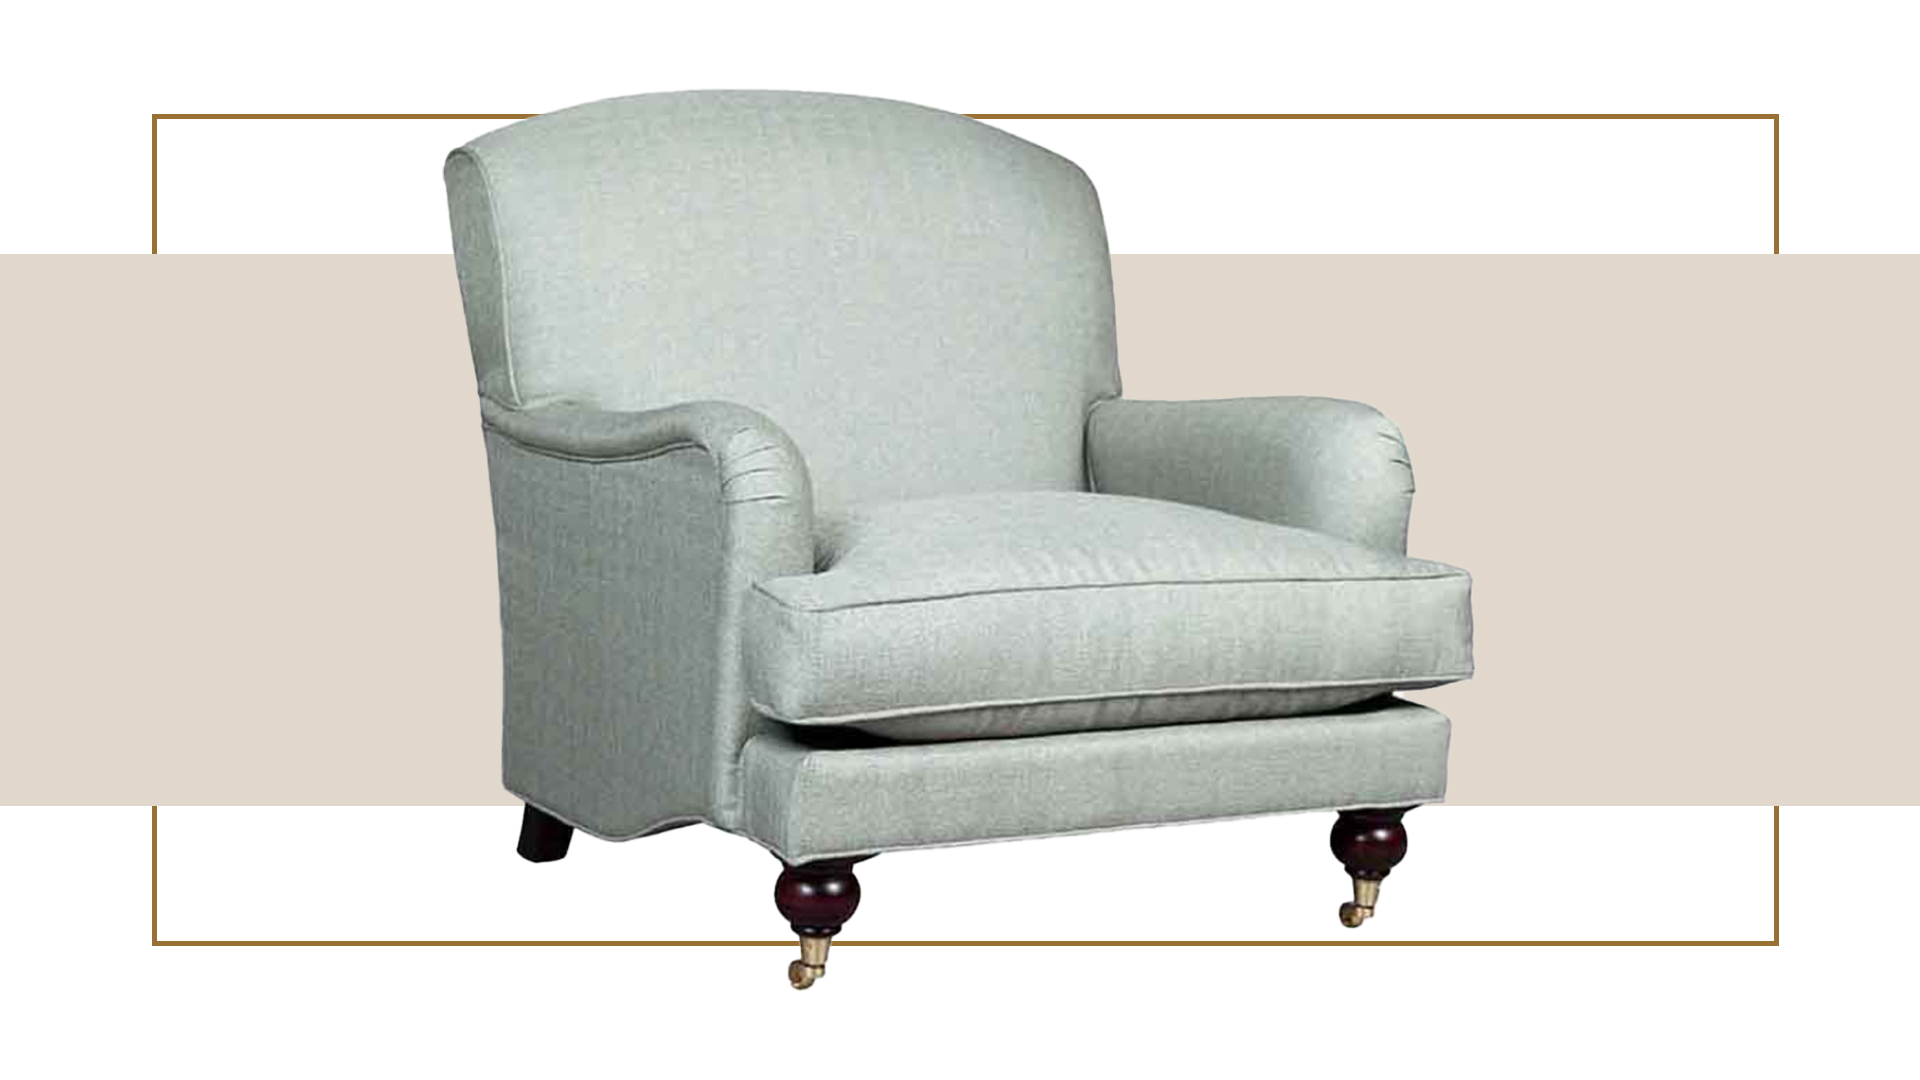 Griffiths Furniture Lounge Upholstered Chairs